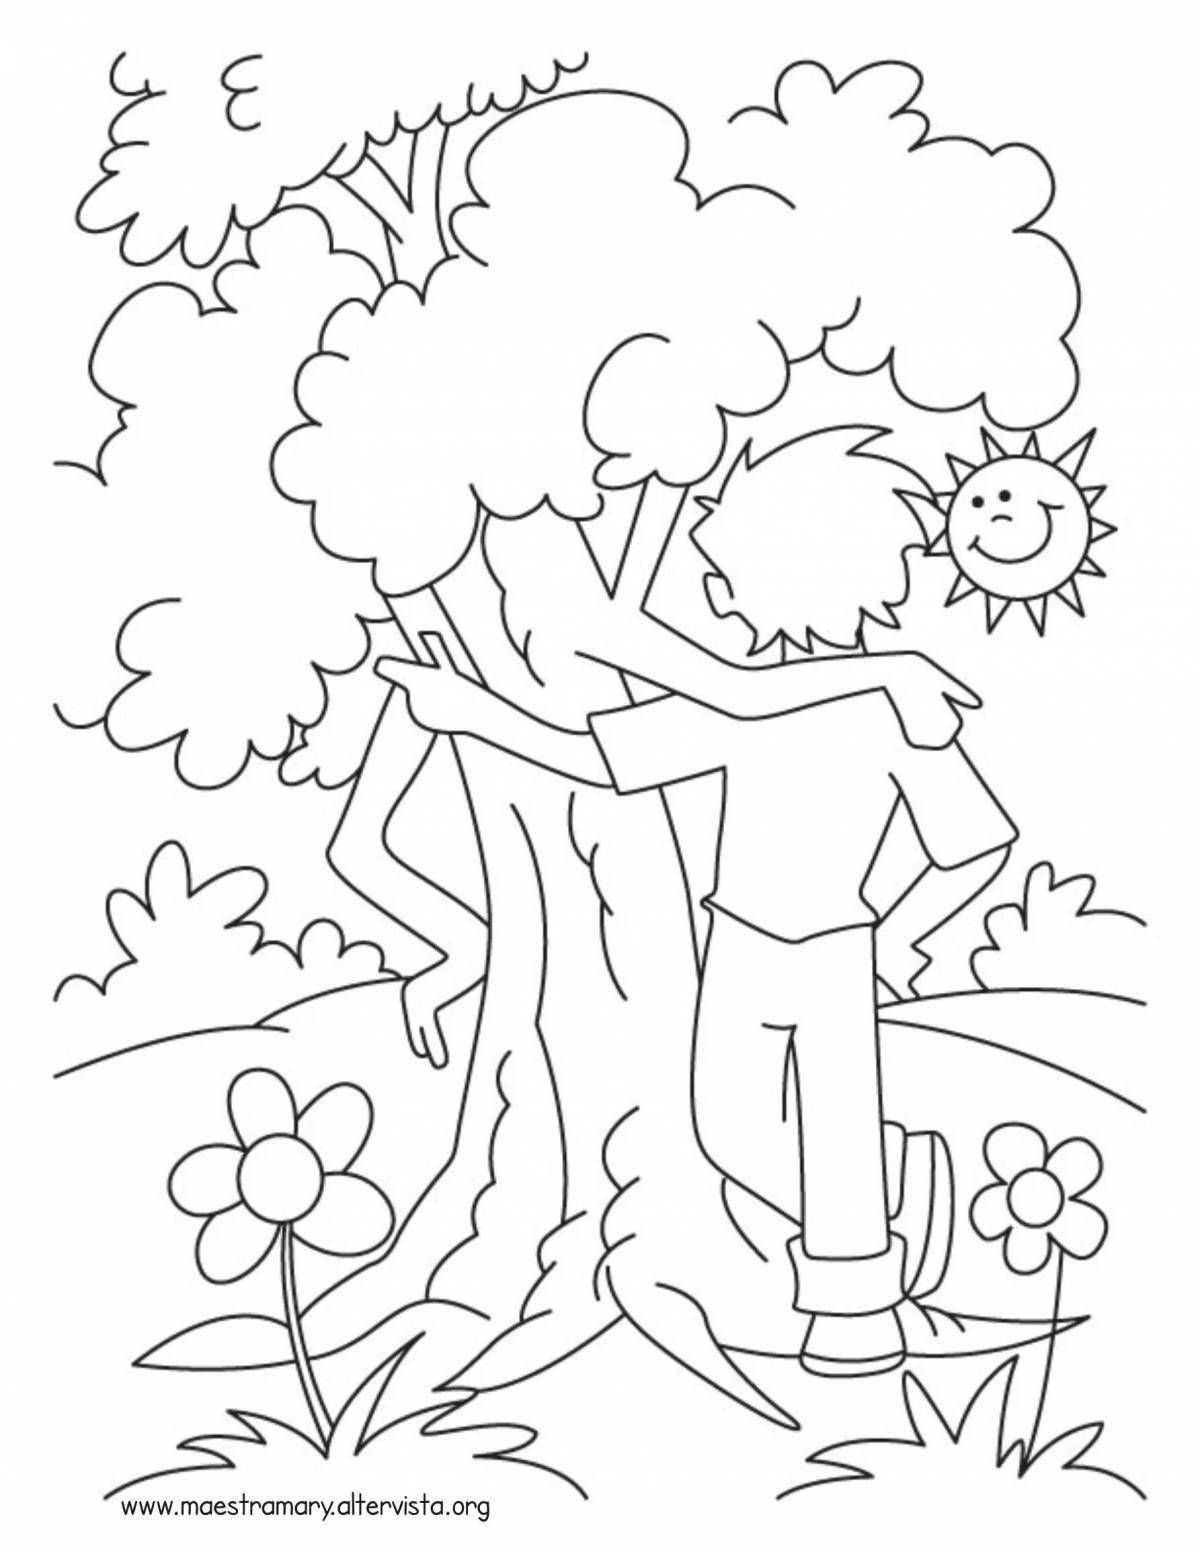 Great environmental poster coloring page